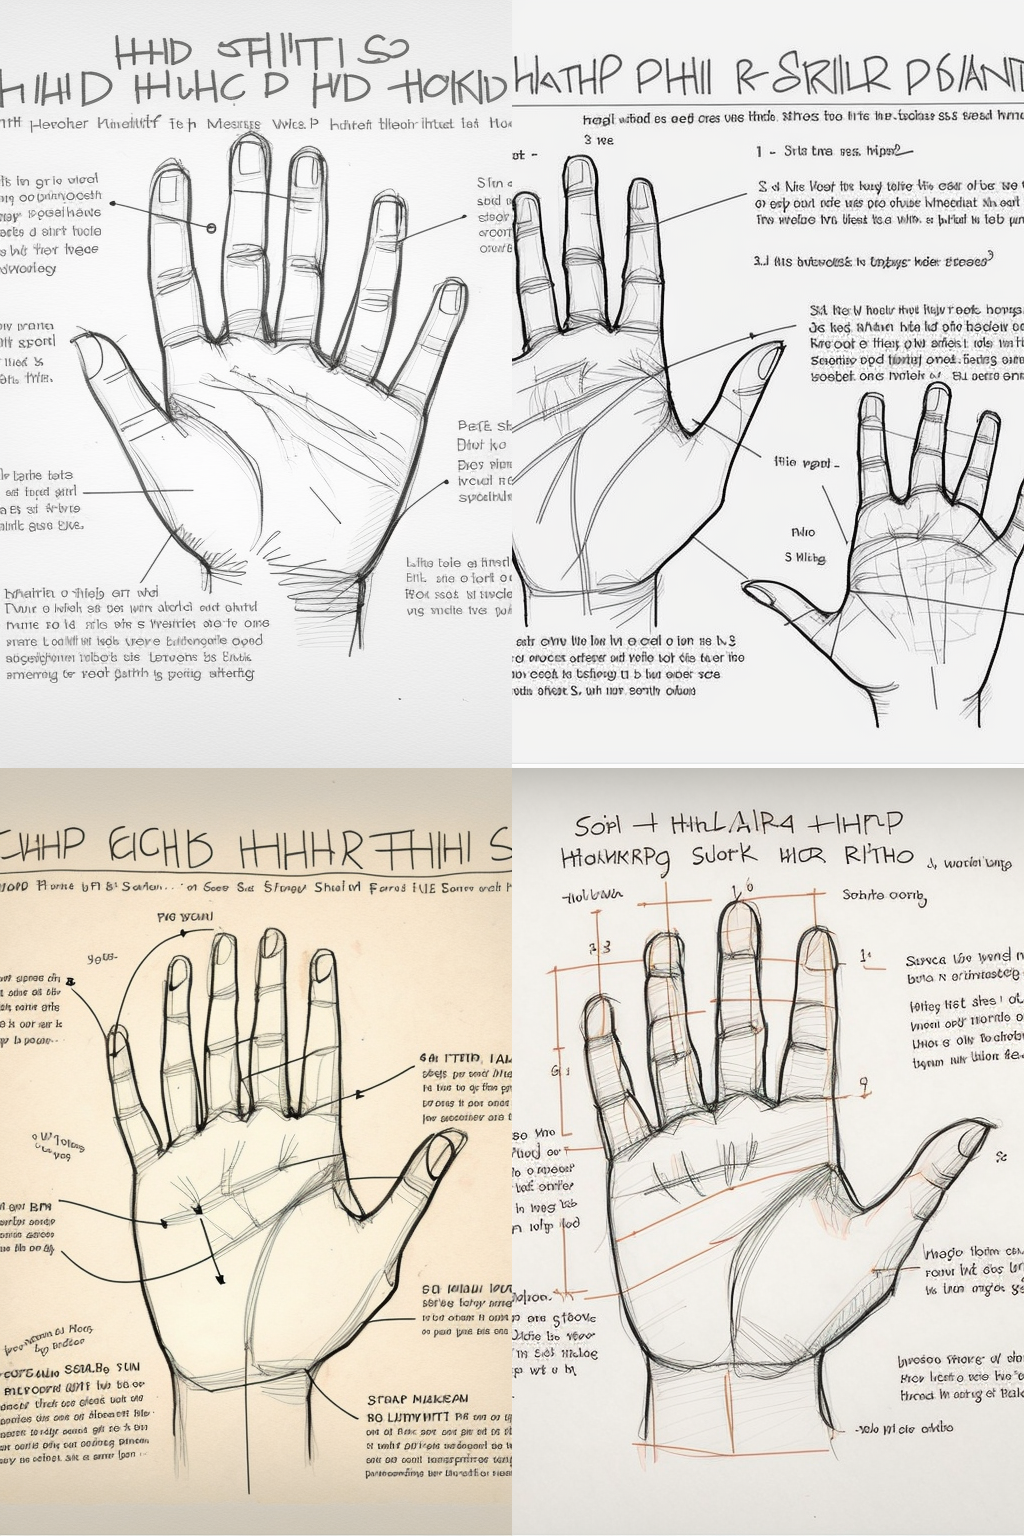 Four sketches surrounded by nonsense text as if from an art textbook about how to draw hands, but two of hands have six fingers rather than the usual five, two have fingers that are too small, one has fingers that are too large, and most are drawn to suggest that the fingernails are on the palm-side of the hand.